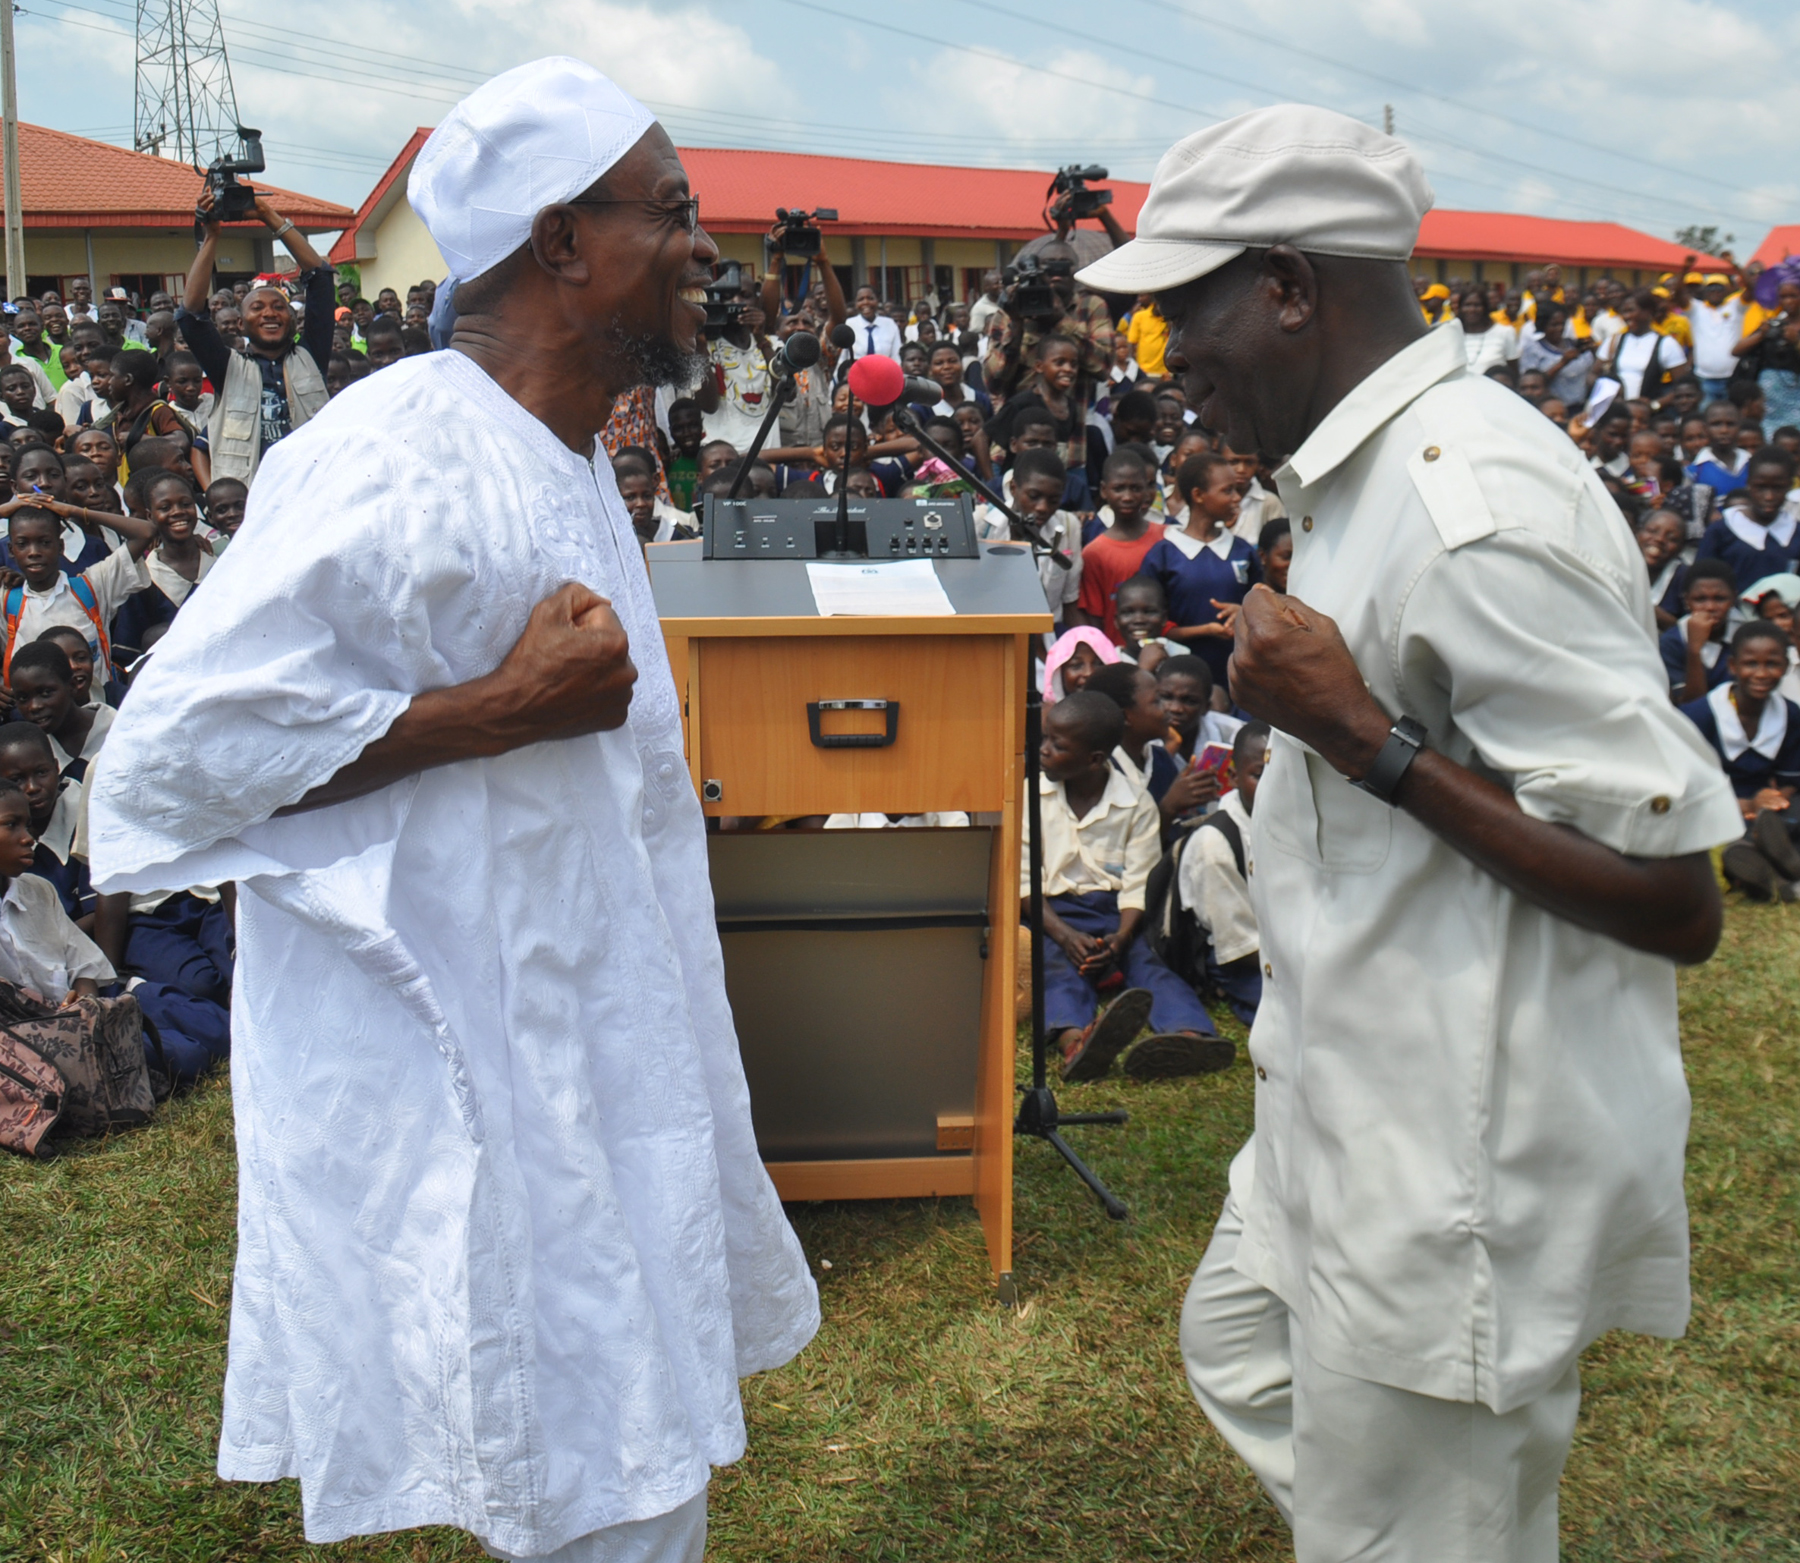 Ogbeni Rauf Aregbesola, Governor State of Osun and Comrade Adams Oshiomhole, Governor of Edo State dance during the commissioning of the rebuilt Asoro Grammar School in Benin City, on Friday